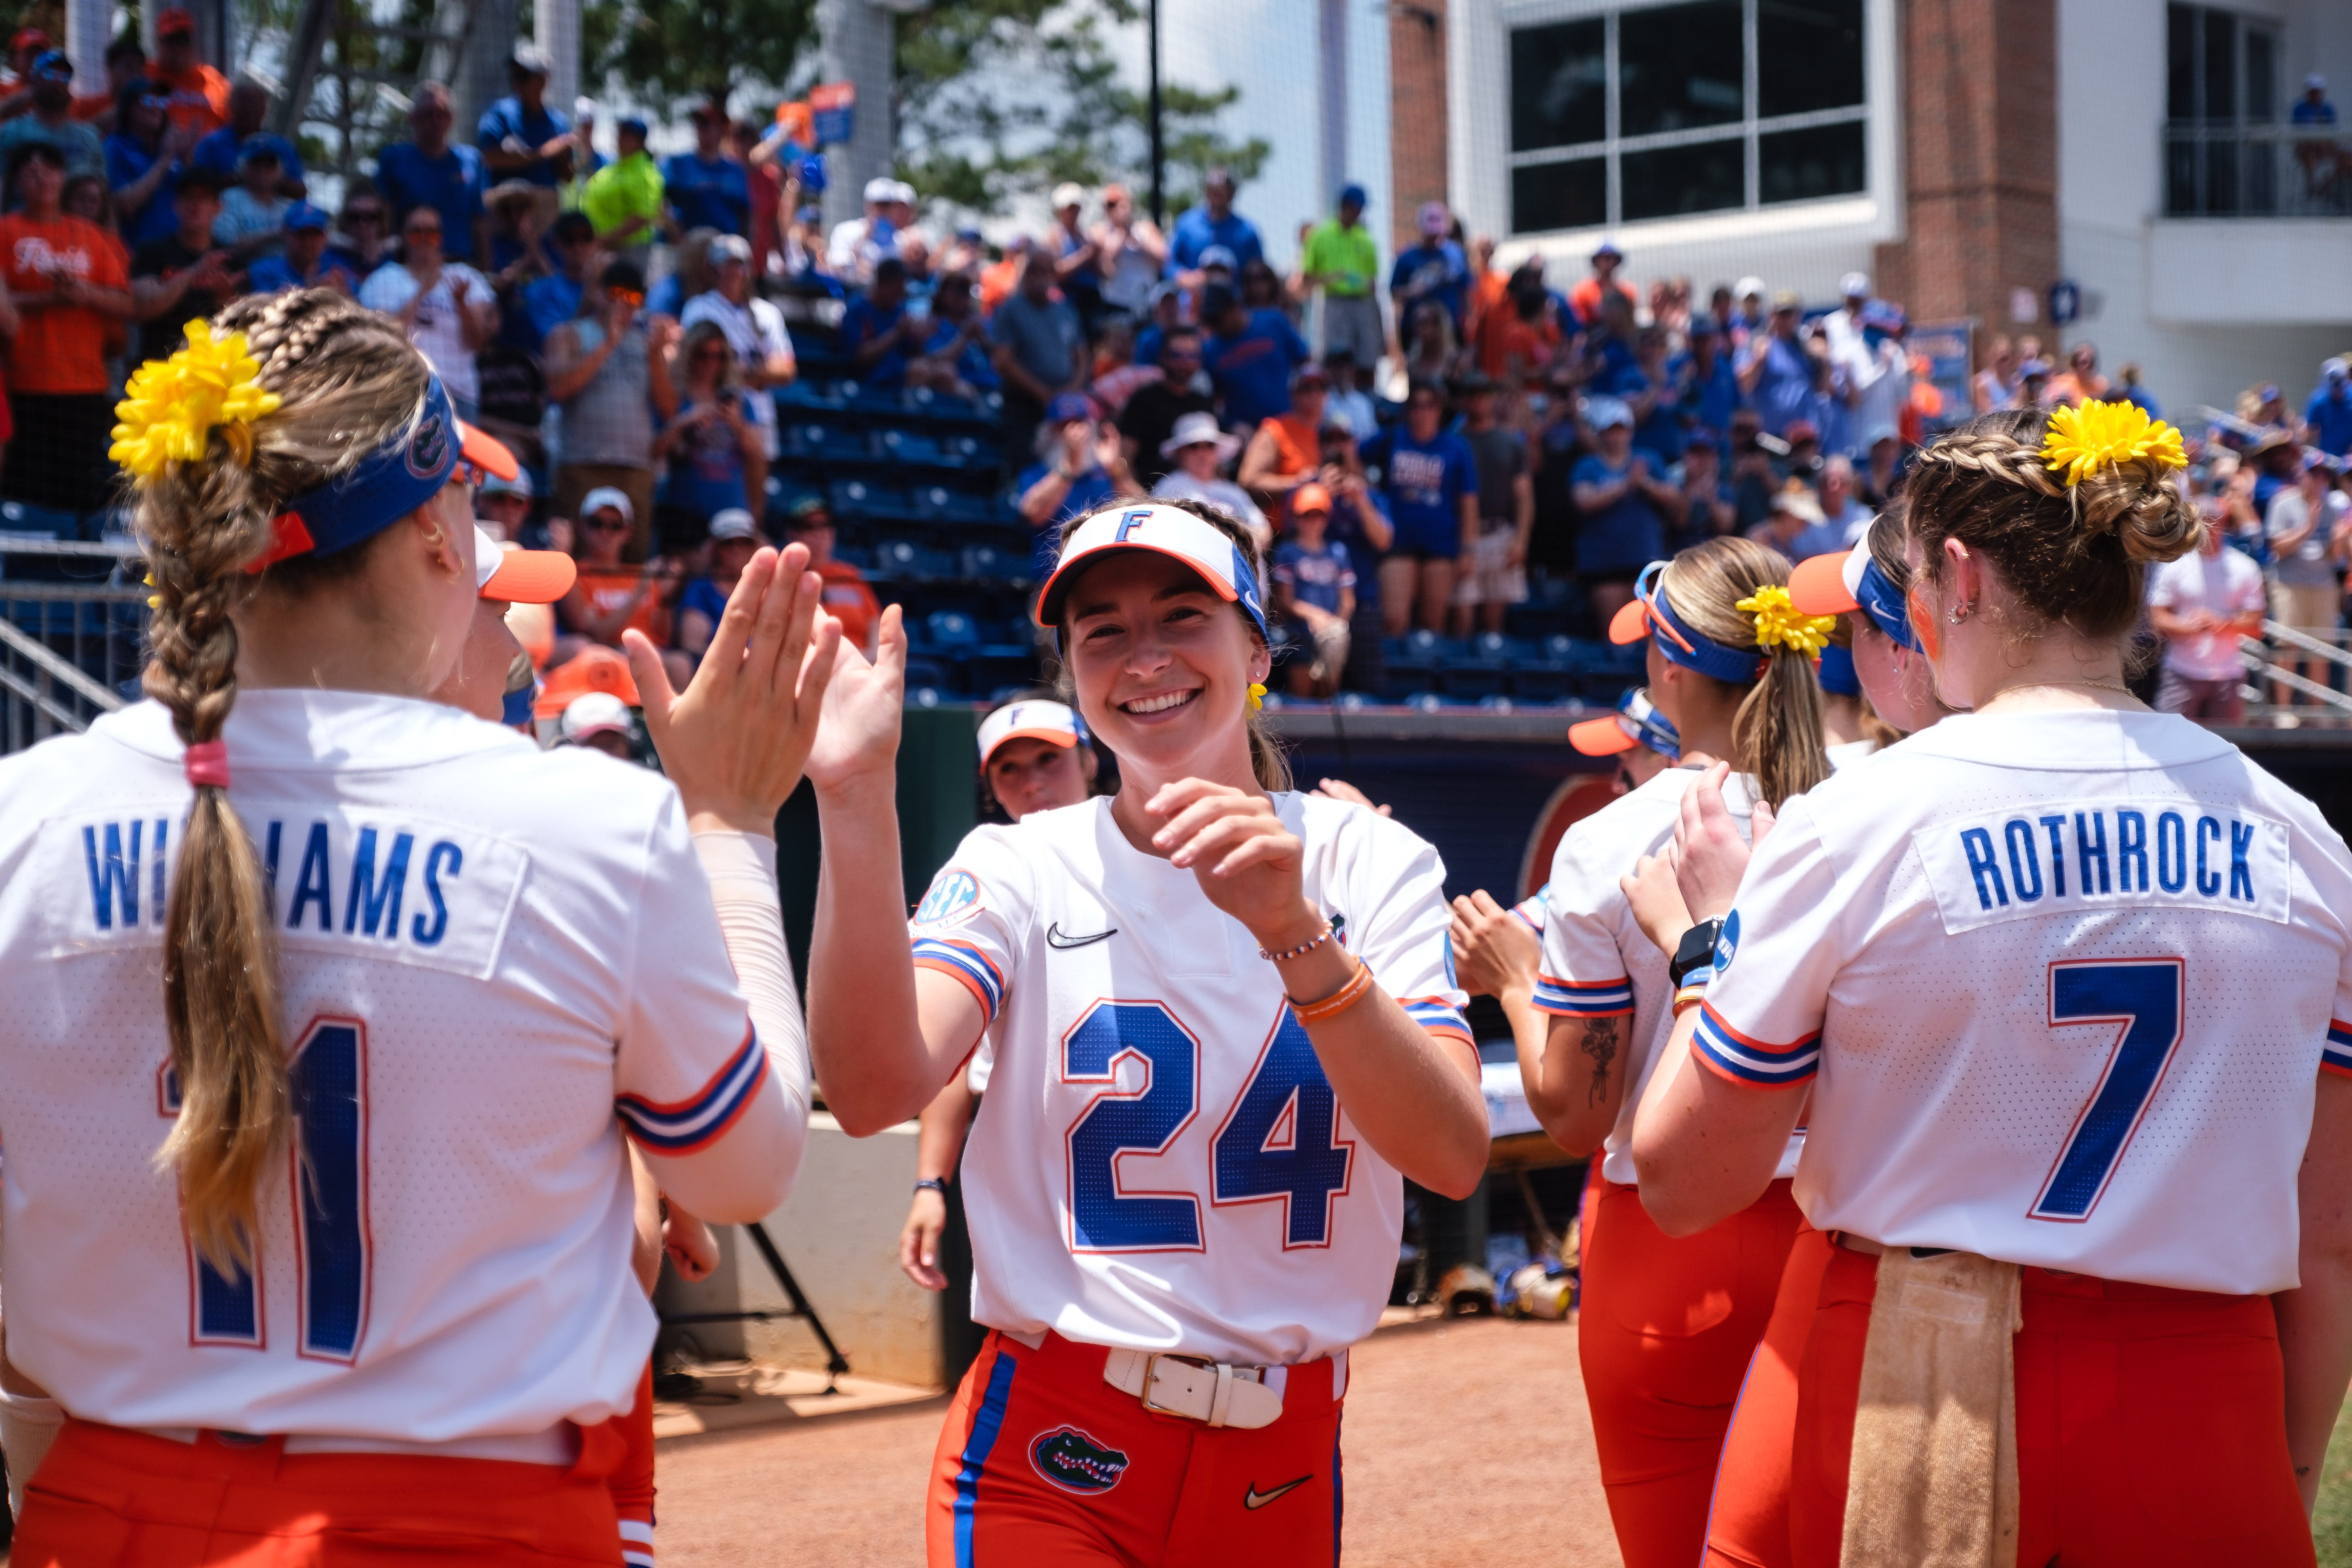 Florida defeats Baylor to win Super Regional, advance to 12th Women's College World Series